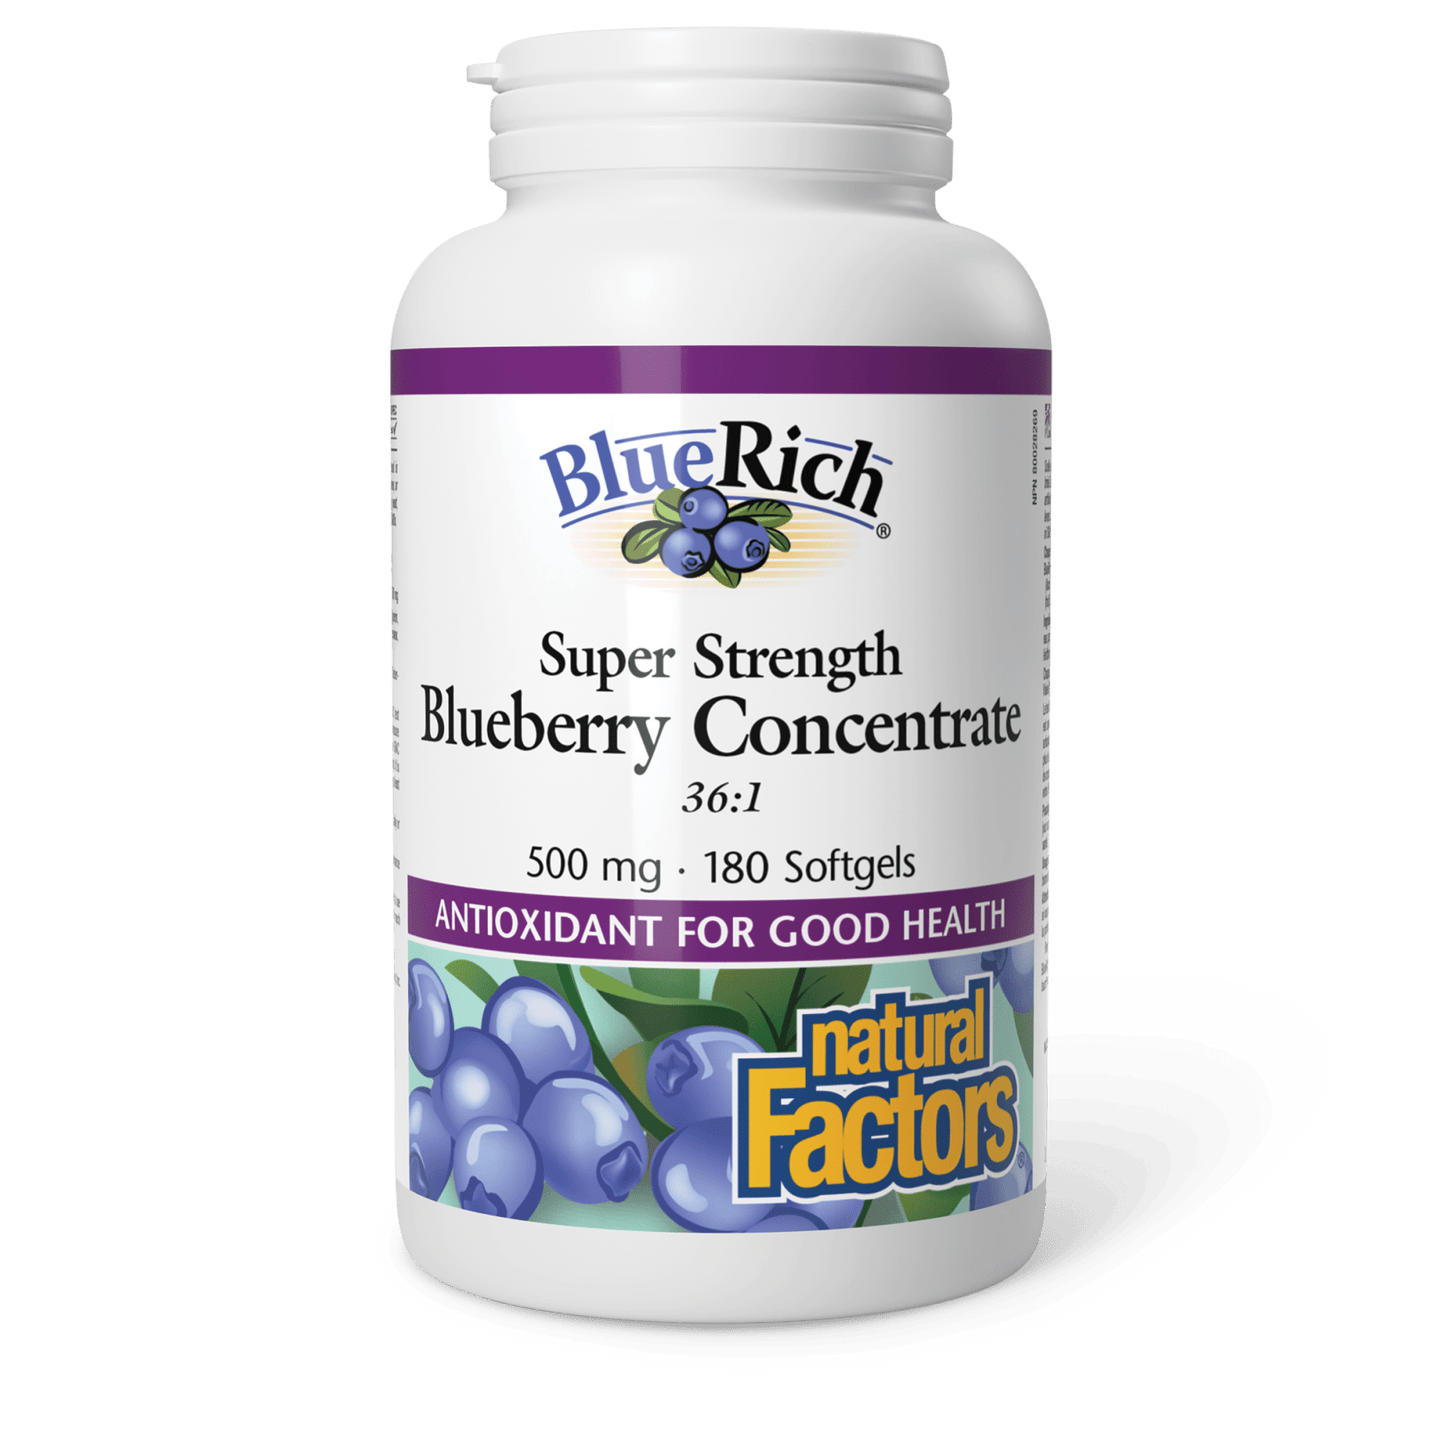 BlueRich Super Strength Blueberry Concentrate 500 mg, Natural Factors|v|image|4517